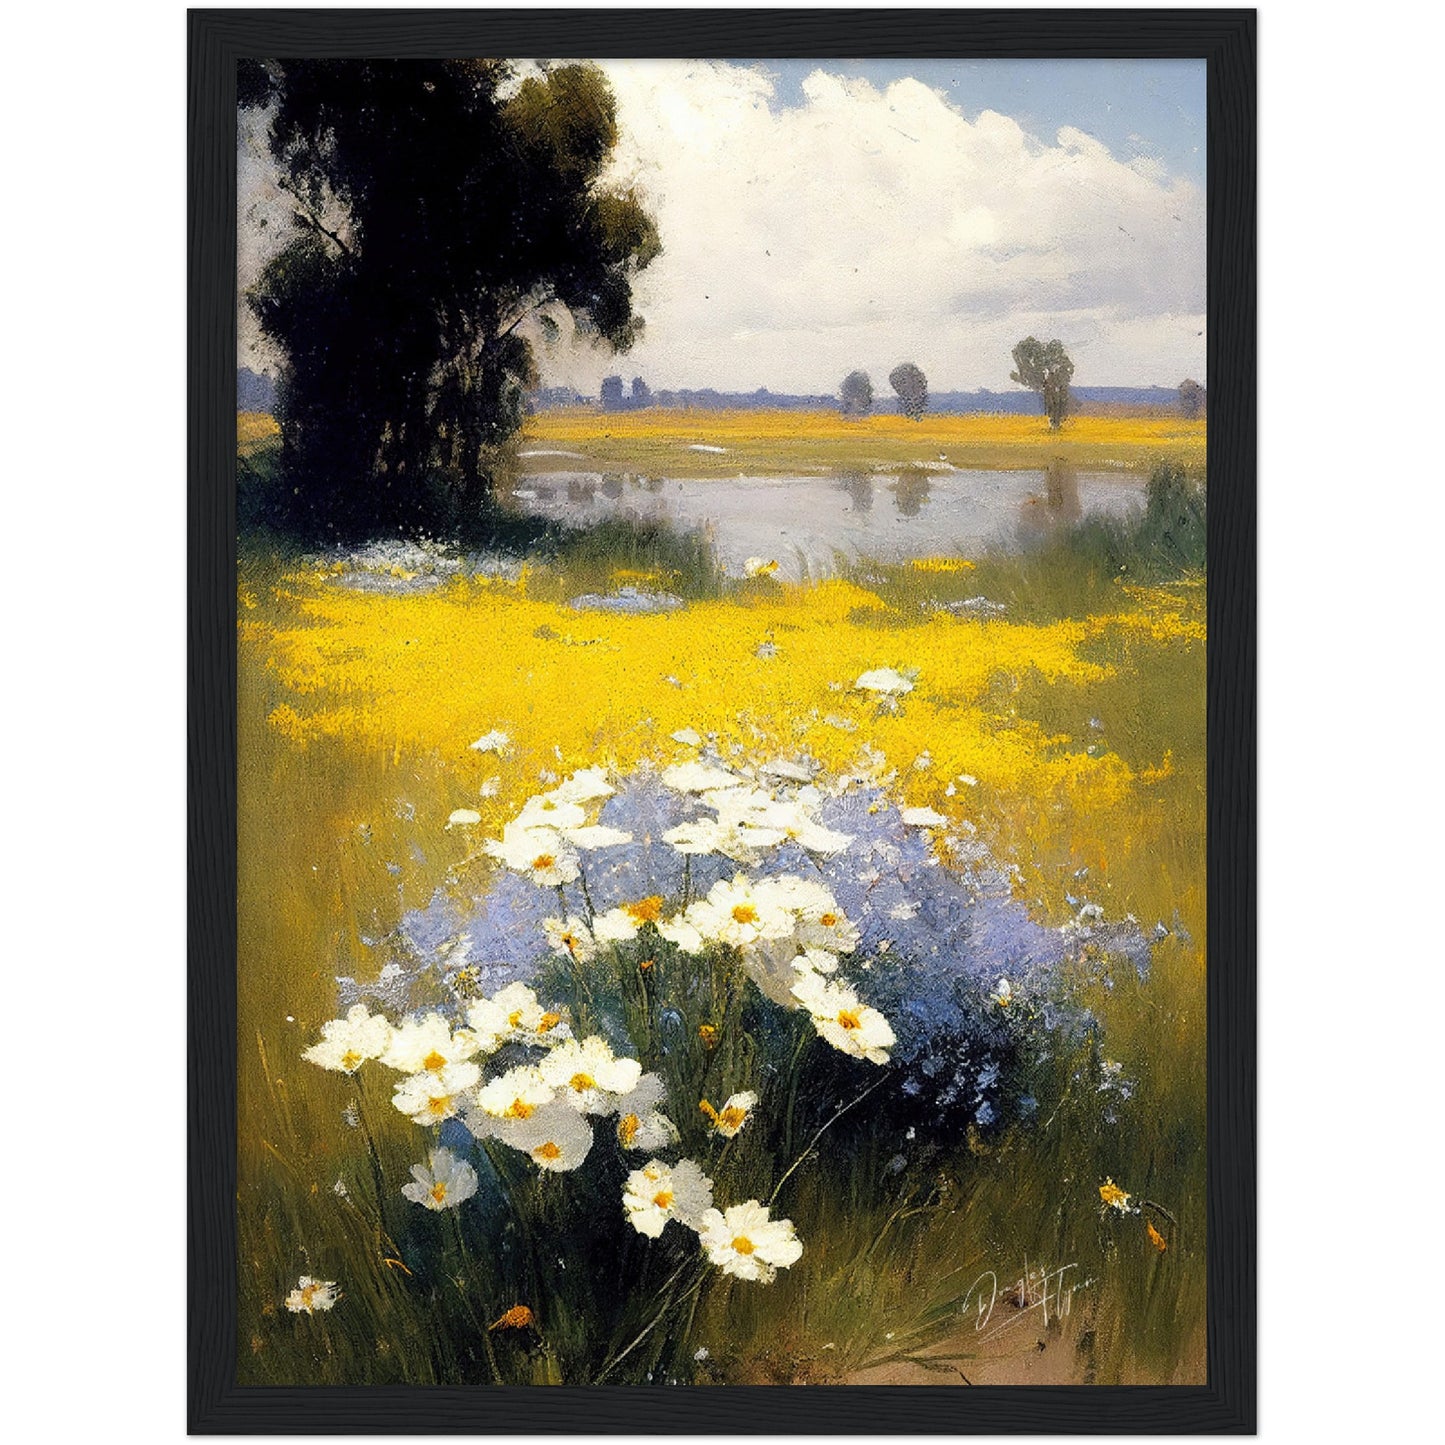 »Wildflowers And The Lake« retro poster